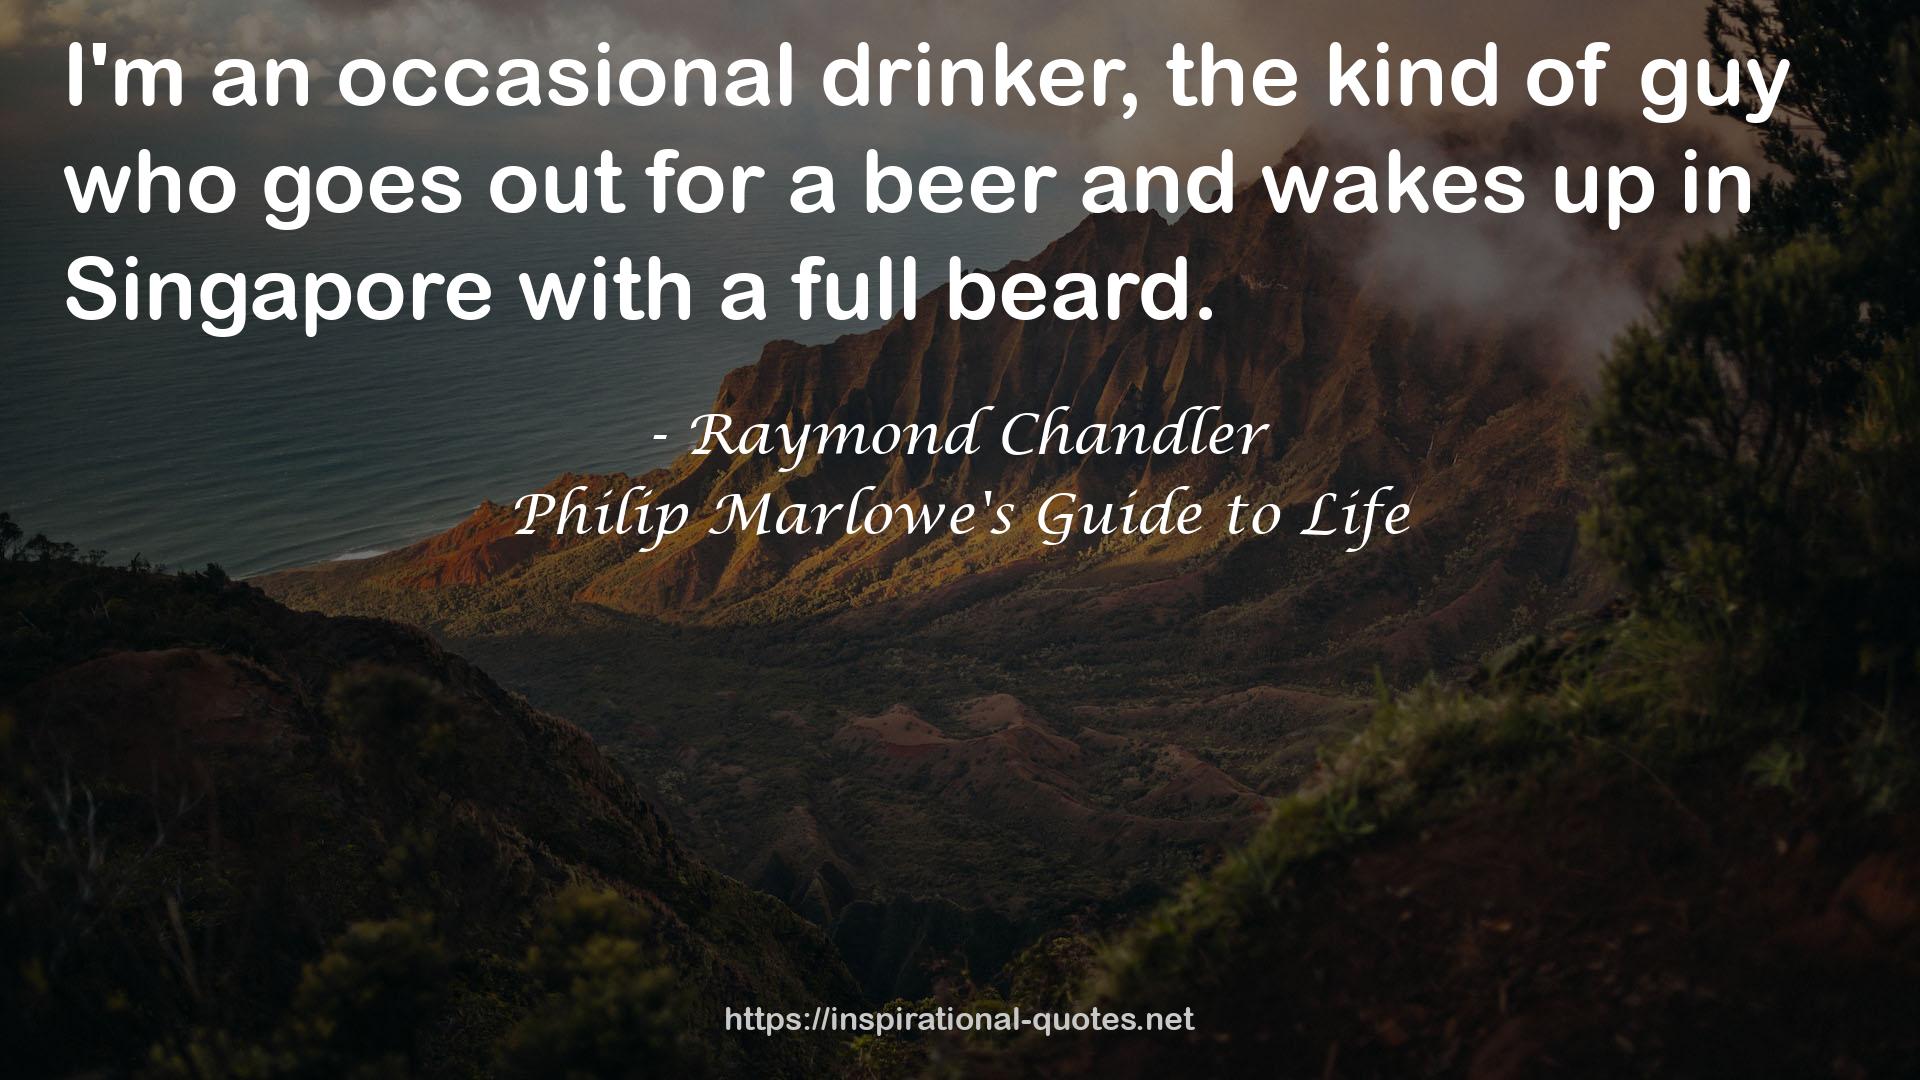 Philip Marlowe's Guide to Life QUOTES